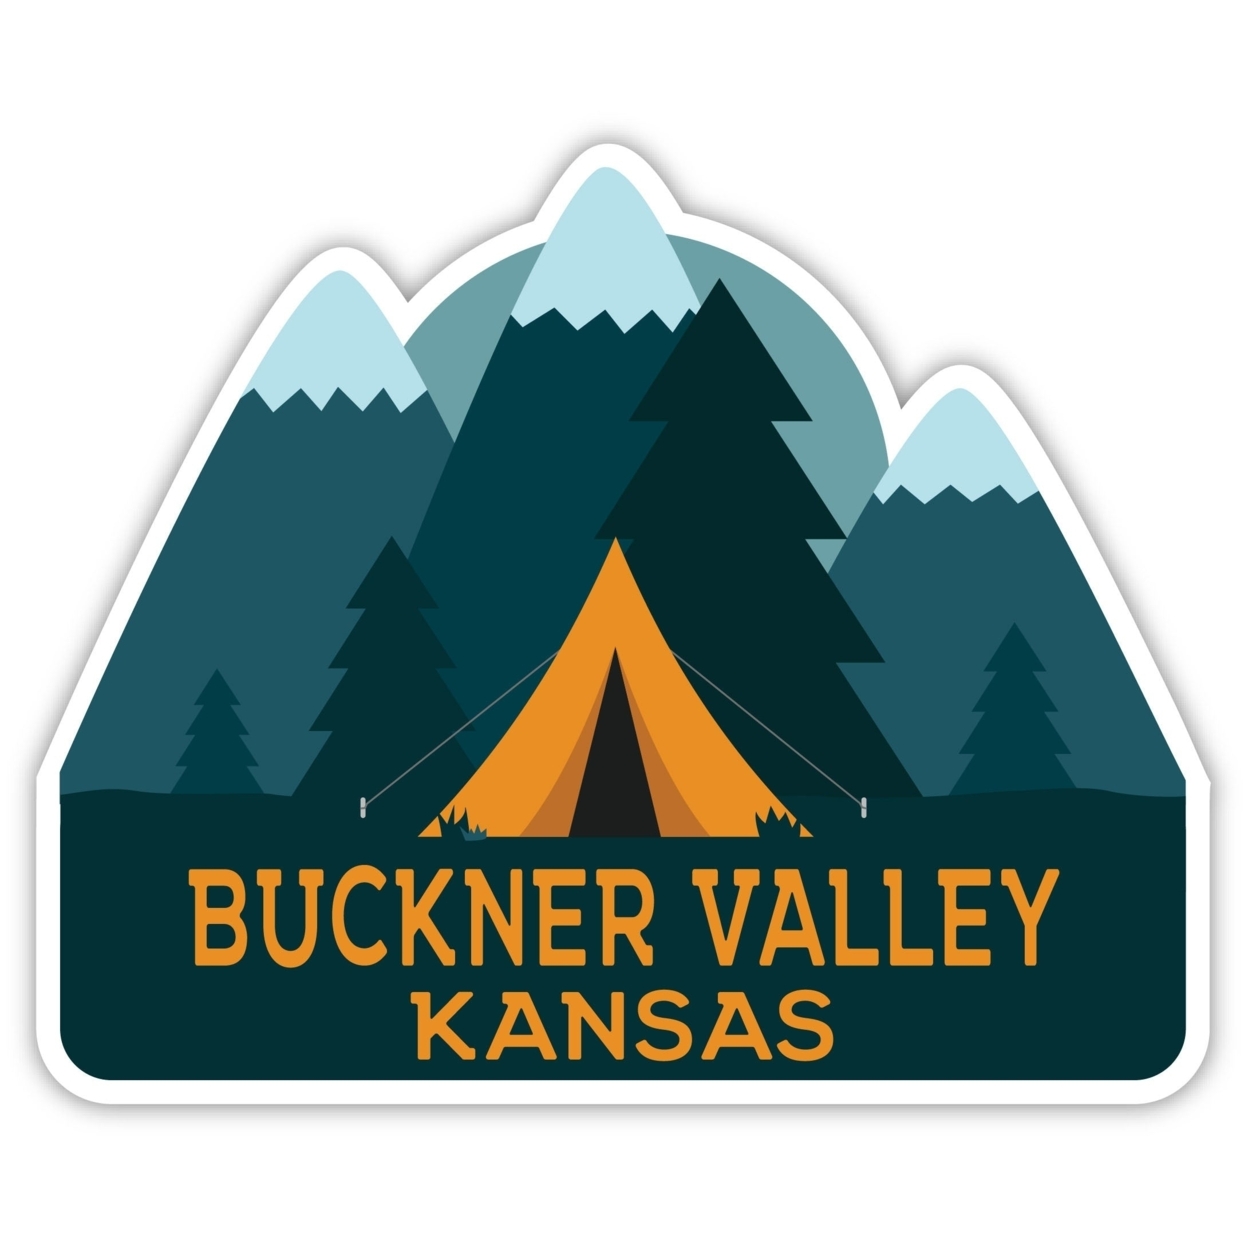 Buckner Valley Kansas Souvenir Decorative Stickers (Choose Theme And Size) - 4-Pack, 8-Inch, Tent